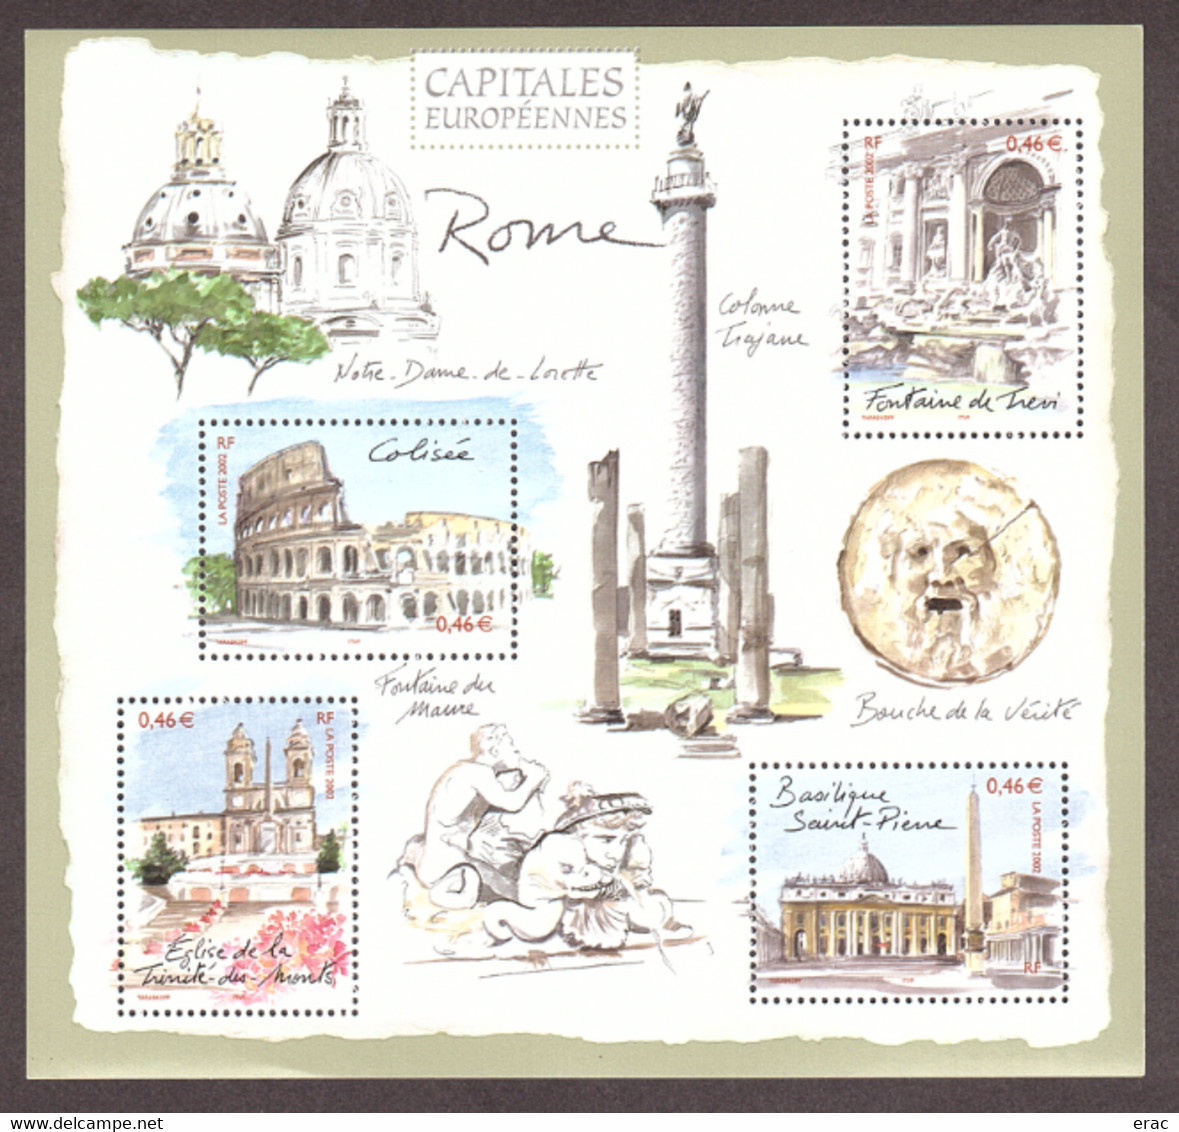 France - 2002 - Bloc-Feuillet N° 53 - Neuf ** - Rome - Nuovi